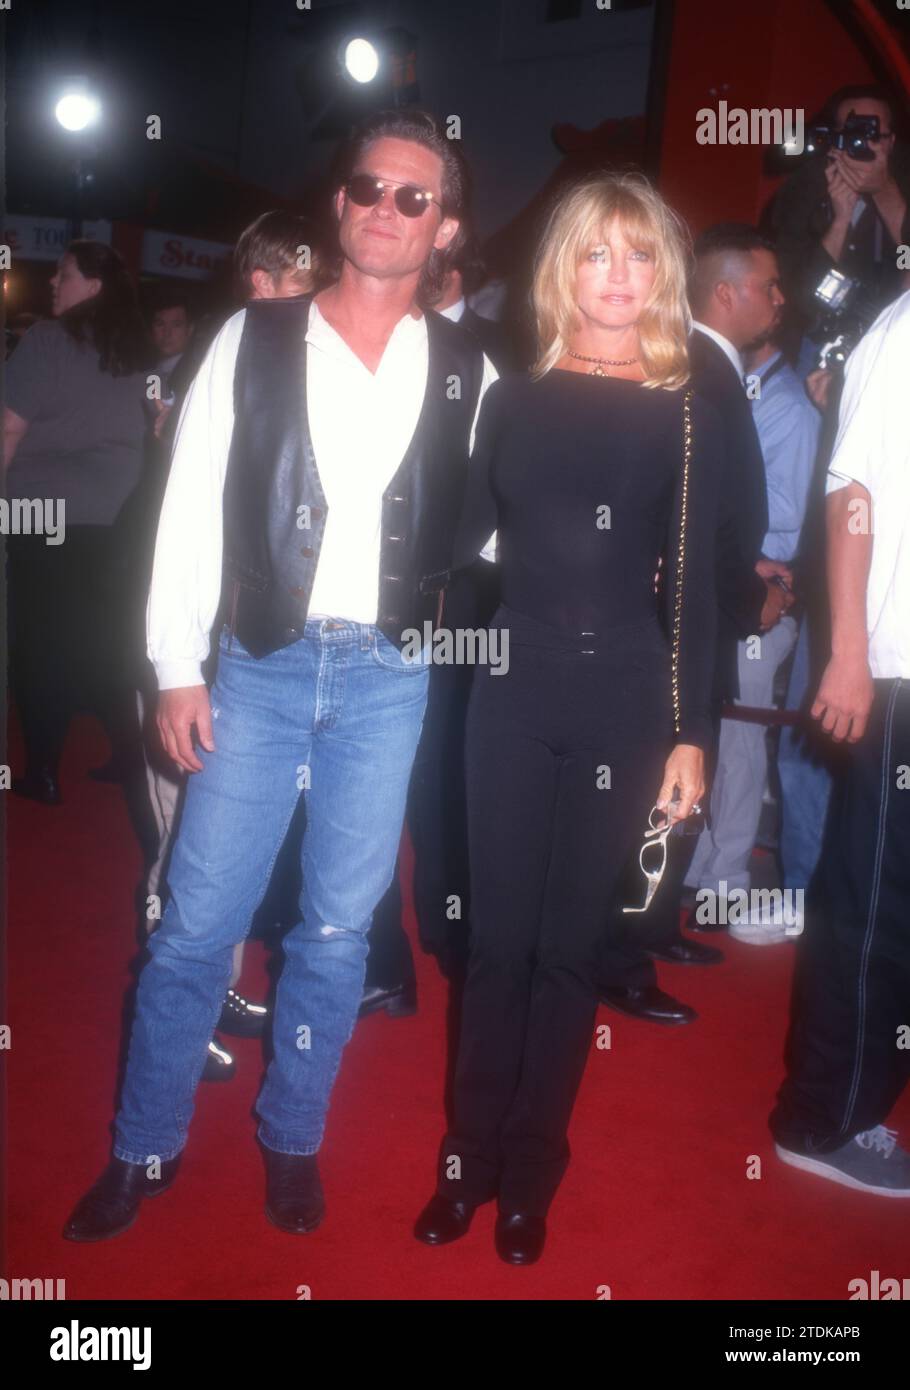 Los Angeles, California, USA 7th August 1996 Actor Kurt Russell and Actress Goldie Hawn attend Paramount Pictures Escape From LA Premiere at Mann Chinese Theatre on August 7, 1996 in Los Angeles, California, USA. Photo by Barry King/Alamy Stock Photo Stock Photo